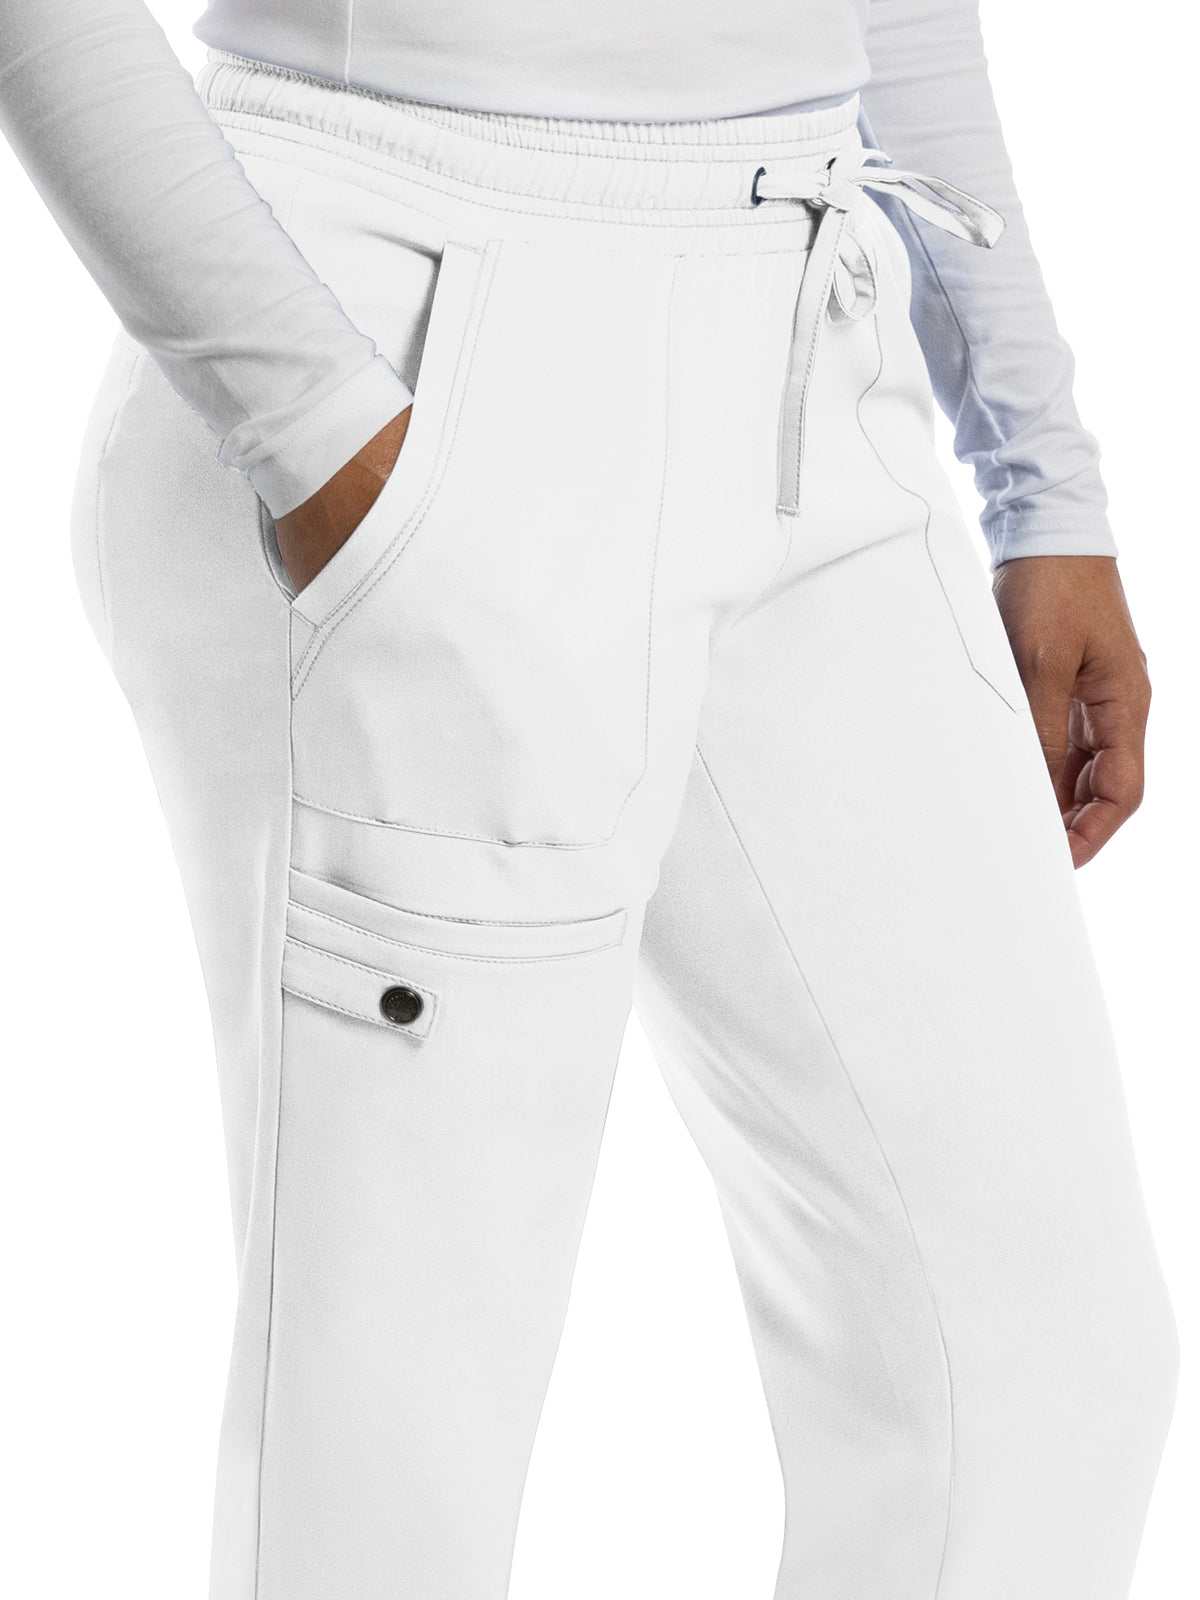 Women's Four-Way Stretch Fabric Pant - 9575 - White